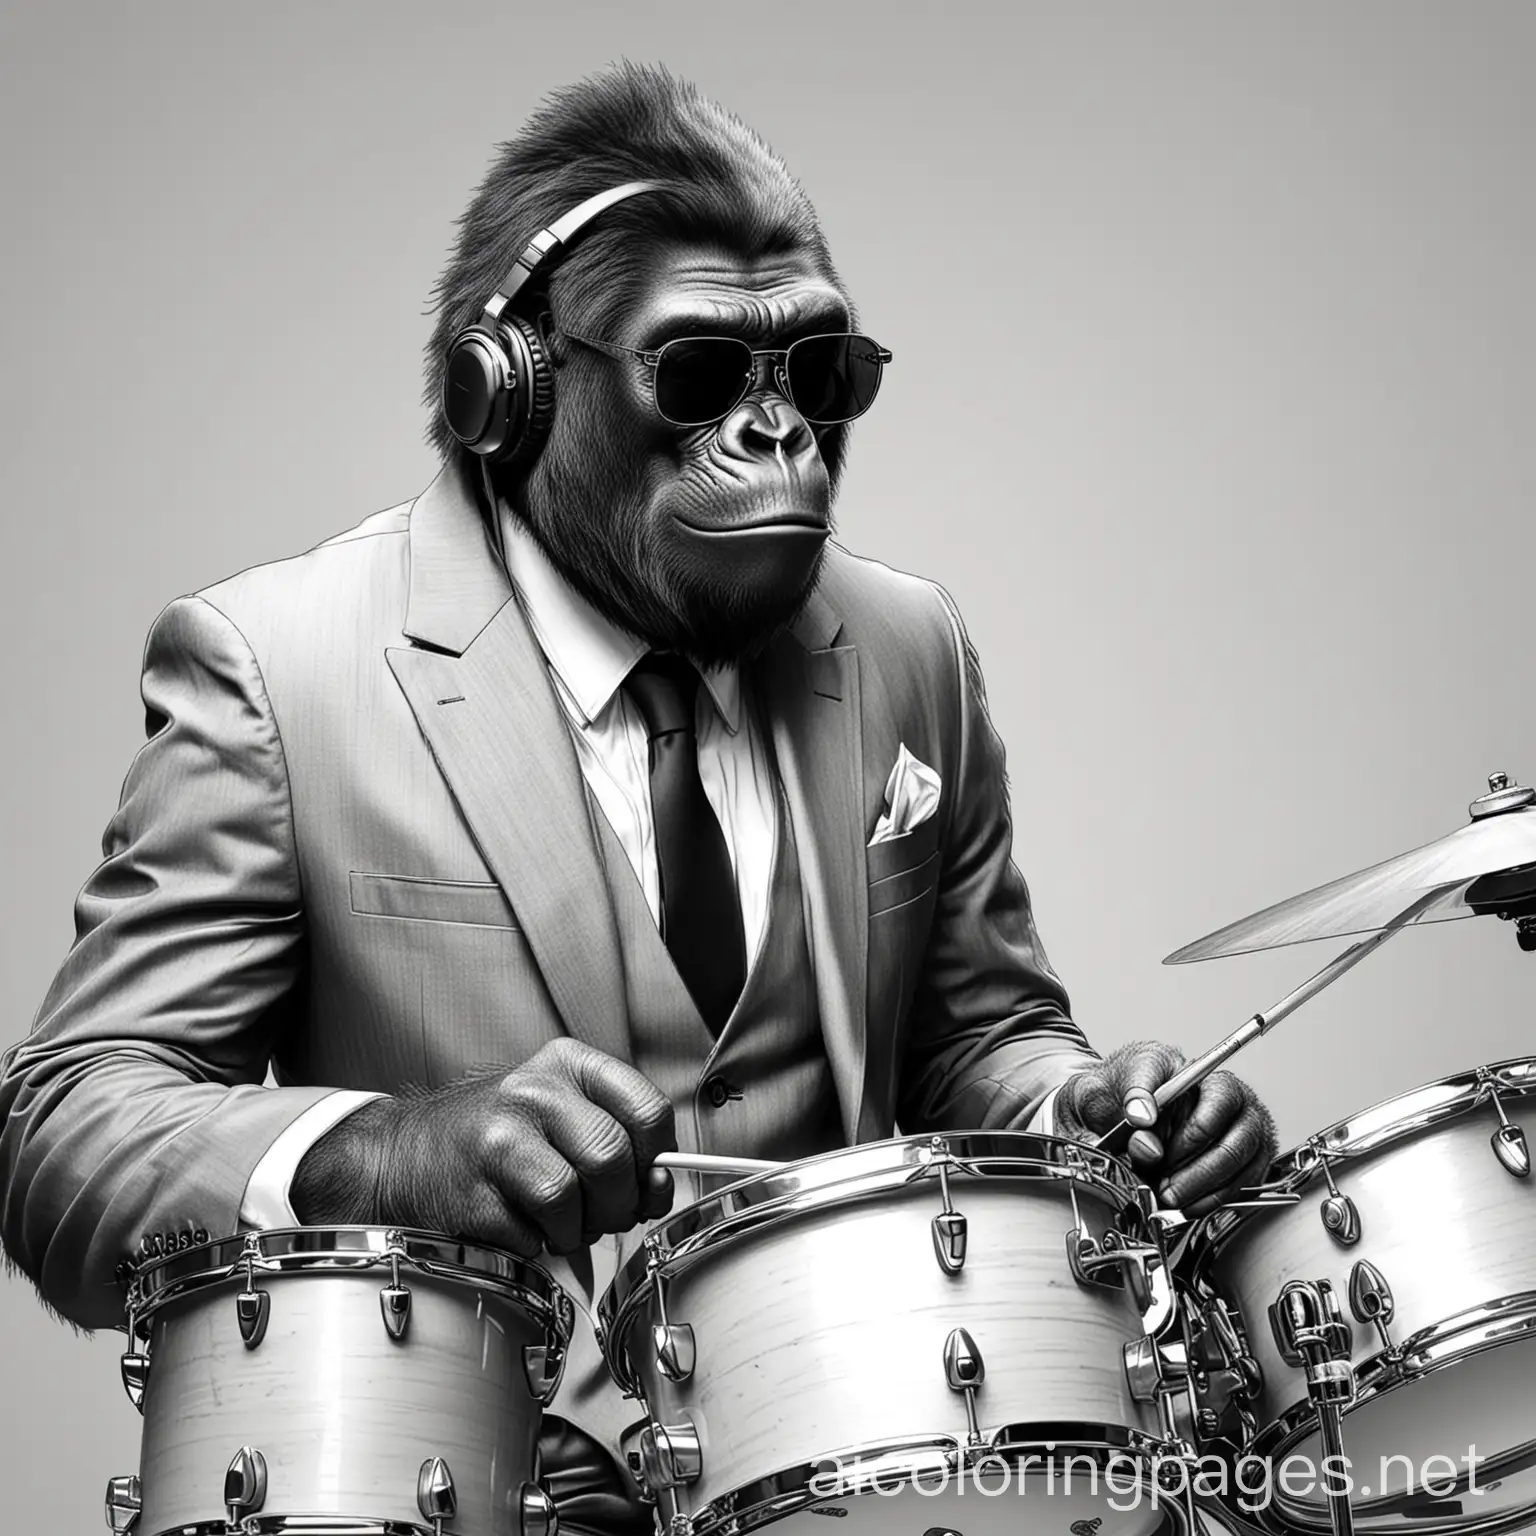 gorilla person wearing cool sunglasses and suit while jamming on a full drum set, Coloring Page, black and white, line art, white background, Simplicity, Ample White Space. The background of the coloring page is plain white to make it easy for young children to color within the lines. The outlines of all the subjects are easy to distinguish, making it simple for kids to color without too much difficulty